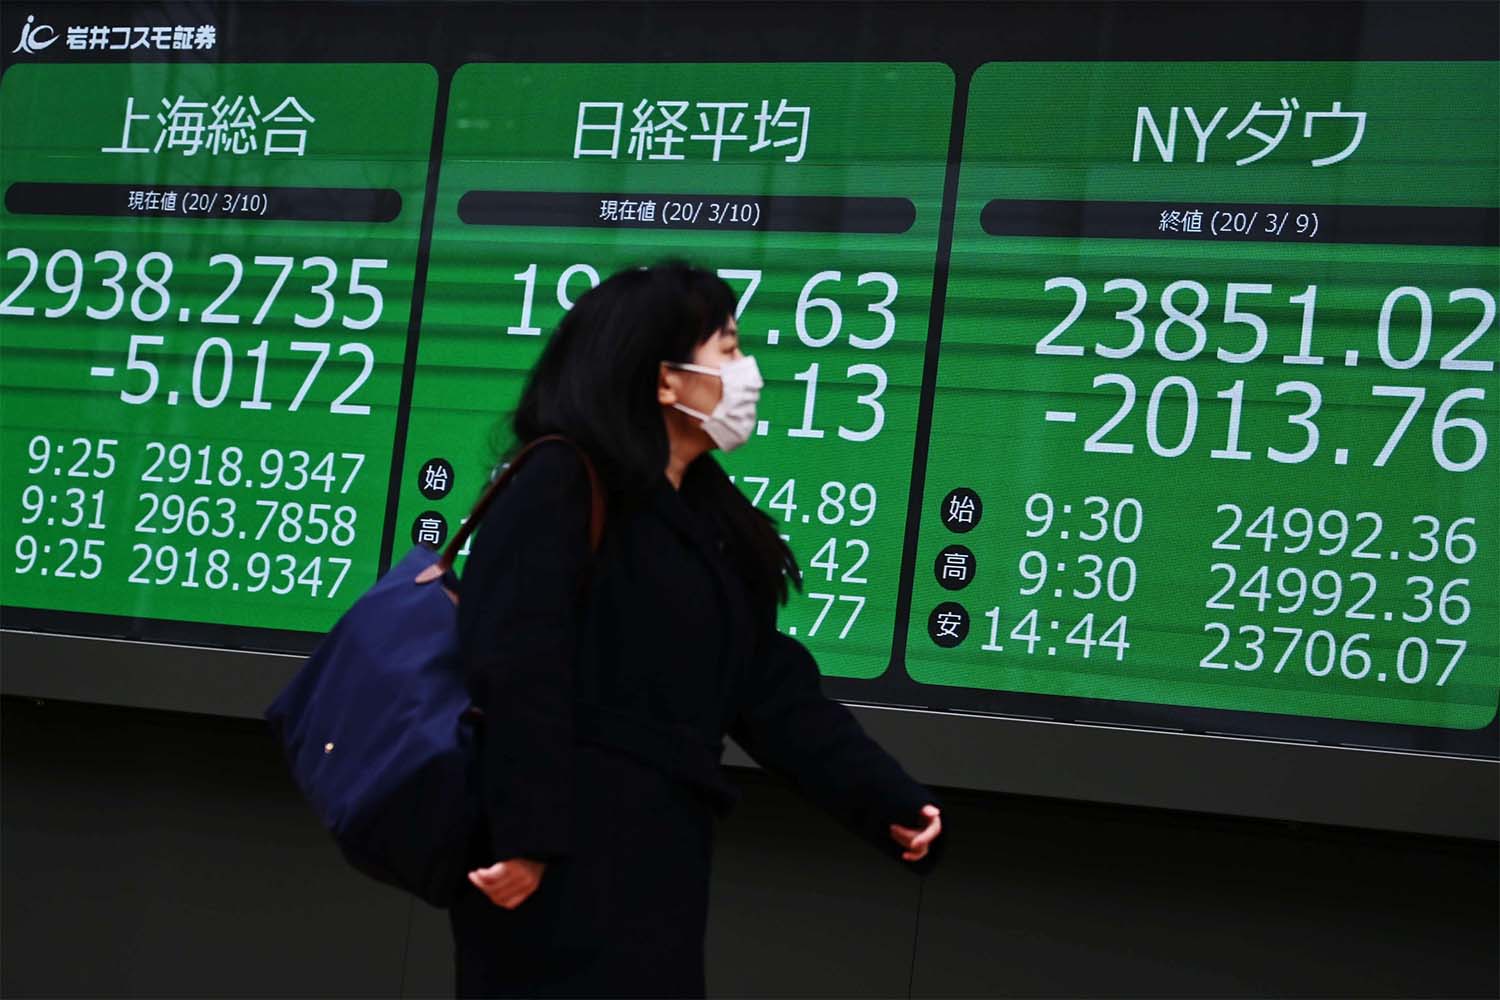 A mask-clad pedestrian passes in front of a quotation board displaying the share price numbers from the Shanghai, Tokyo and New York exchanges, in Tokyo